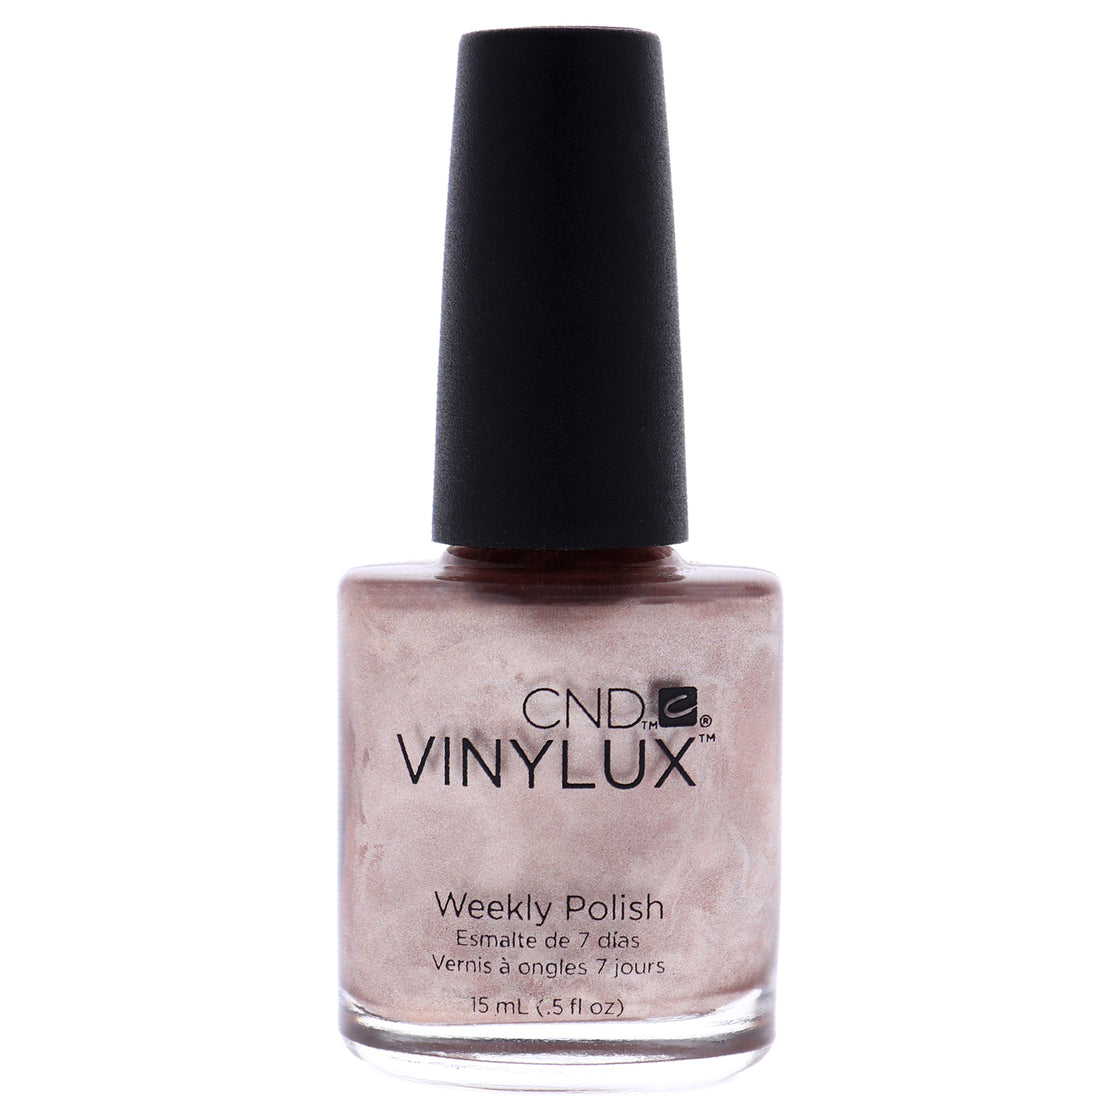 Vinylux Weekly Polish - 260 Radiant Chill by CND for Women - 0.5 oz Nail Polish